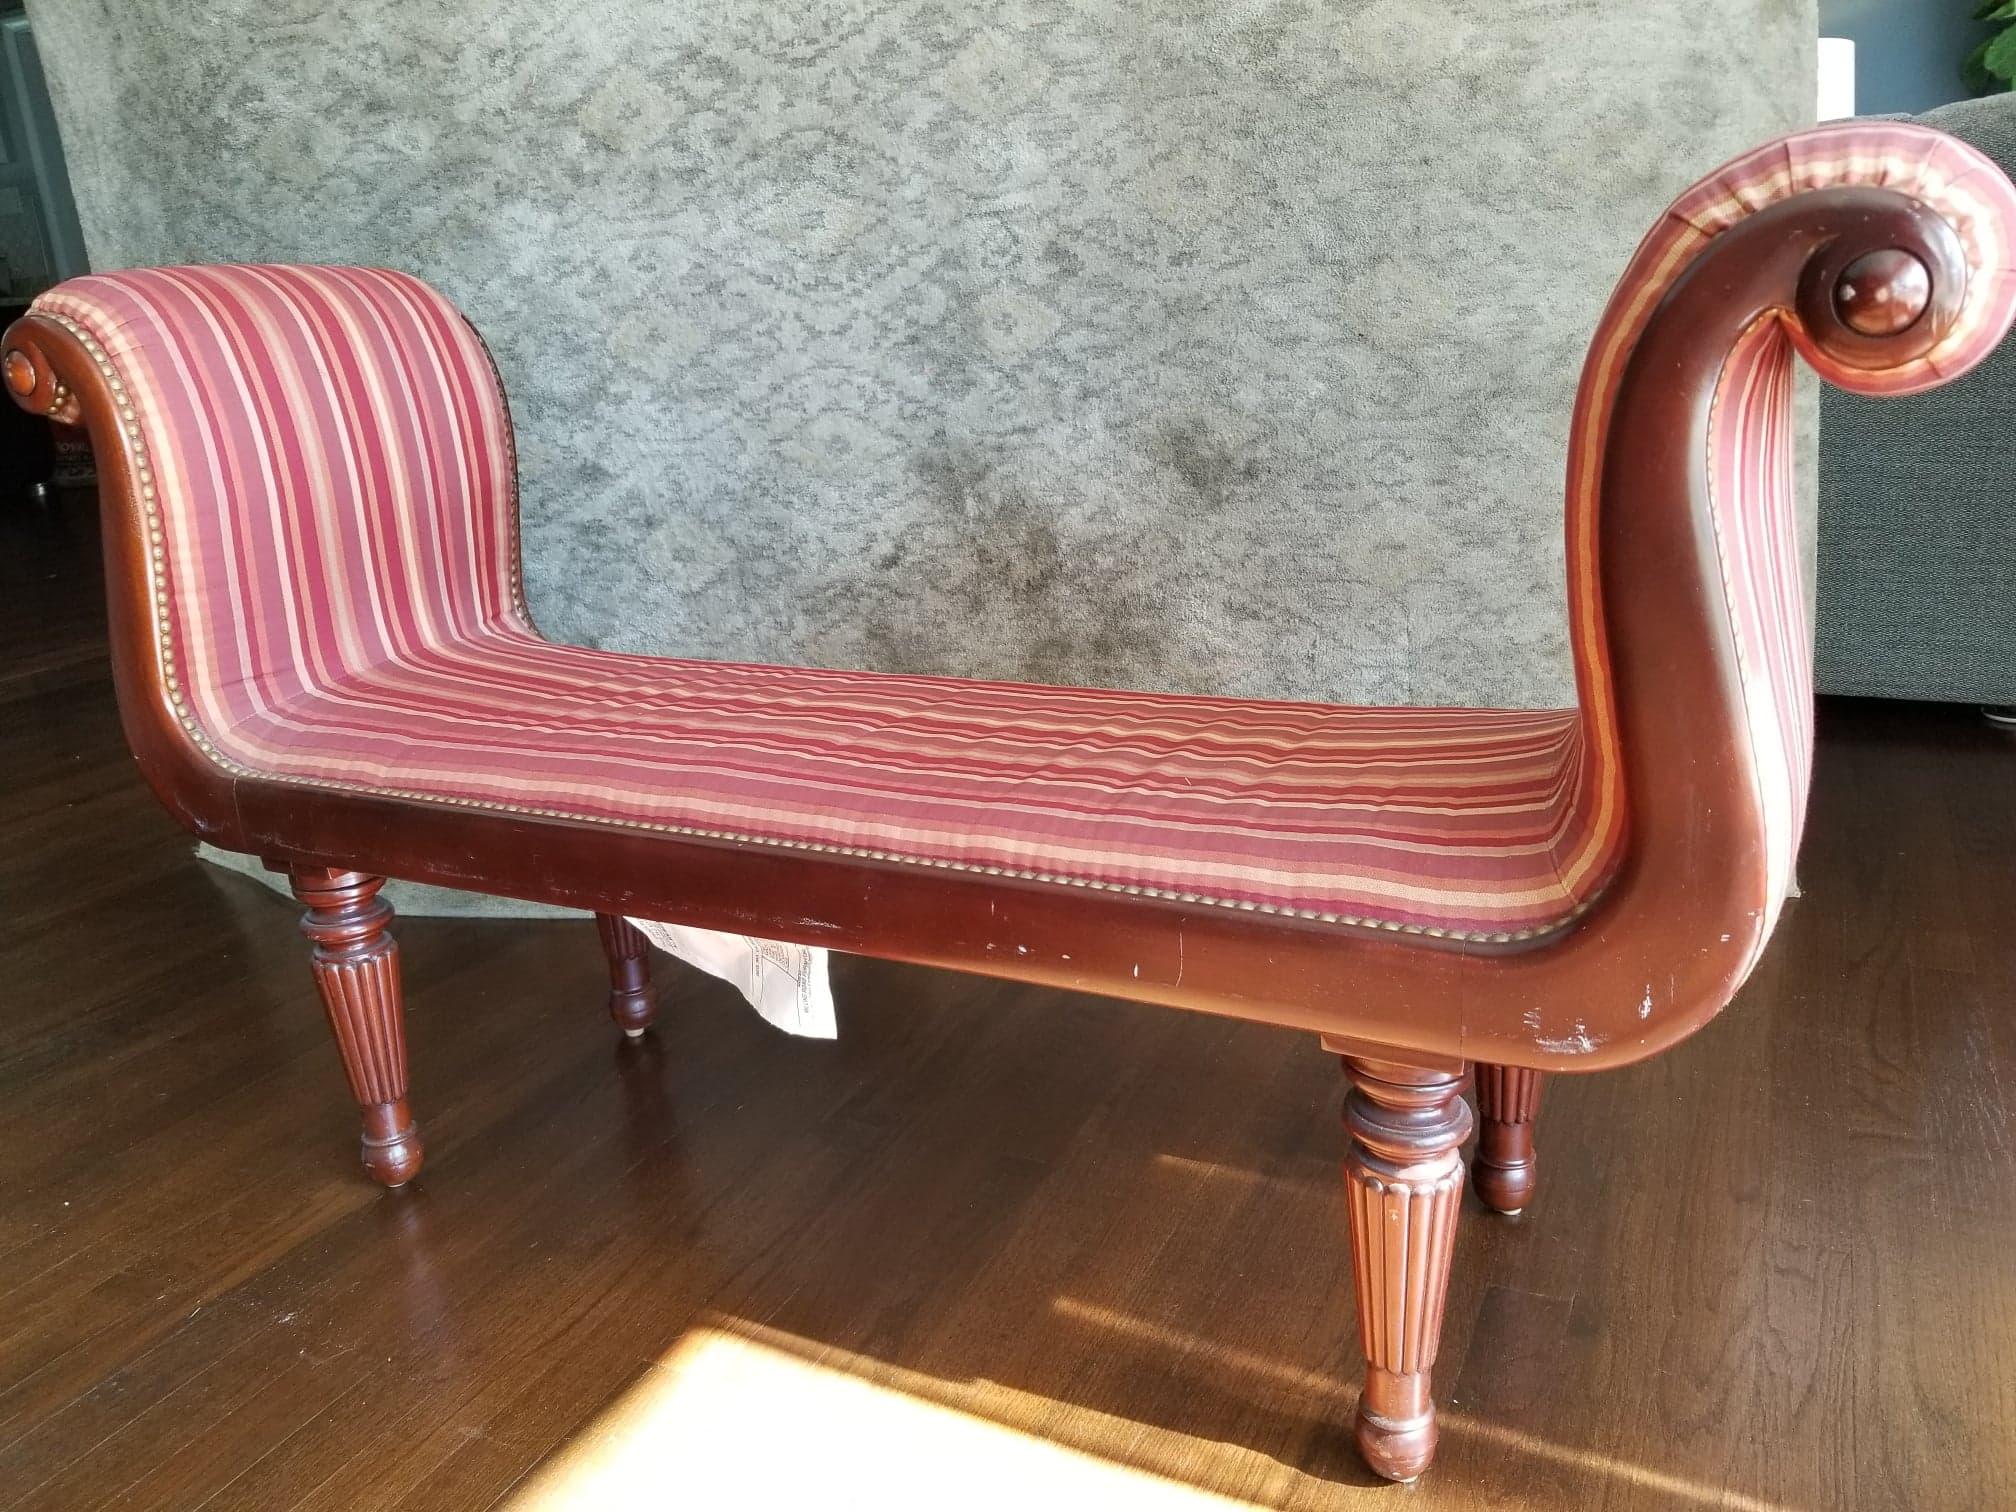 Baker Limited Edition Thomas Pheasant Milling Road Upholstered Bench In Good Condition For Sale In Chicago, IL